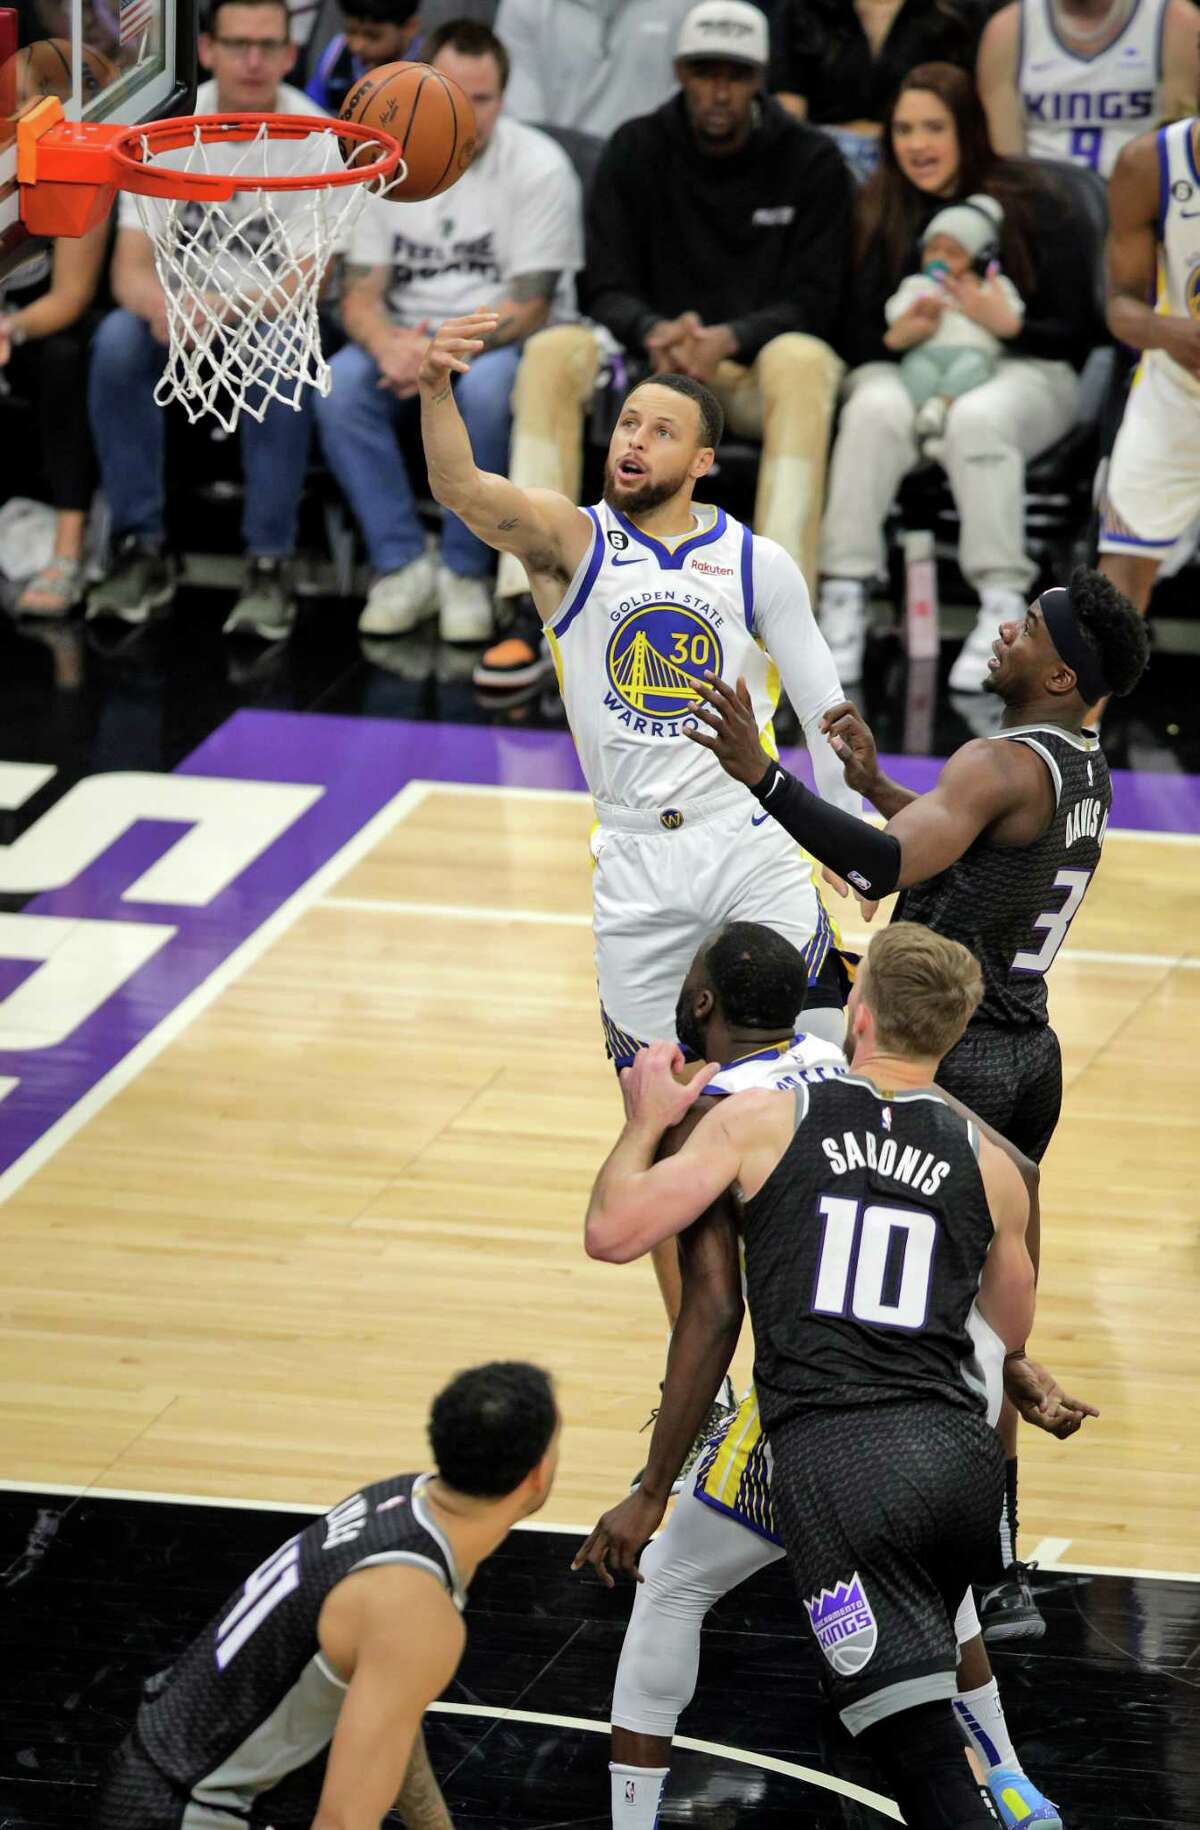 Stephen Curry scores playoff career-high 50 as Warriors down Kings